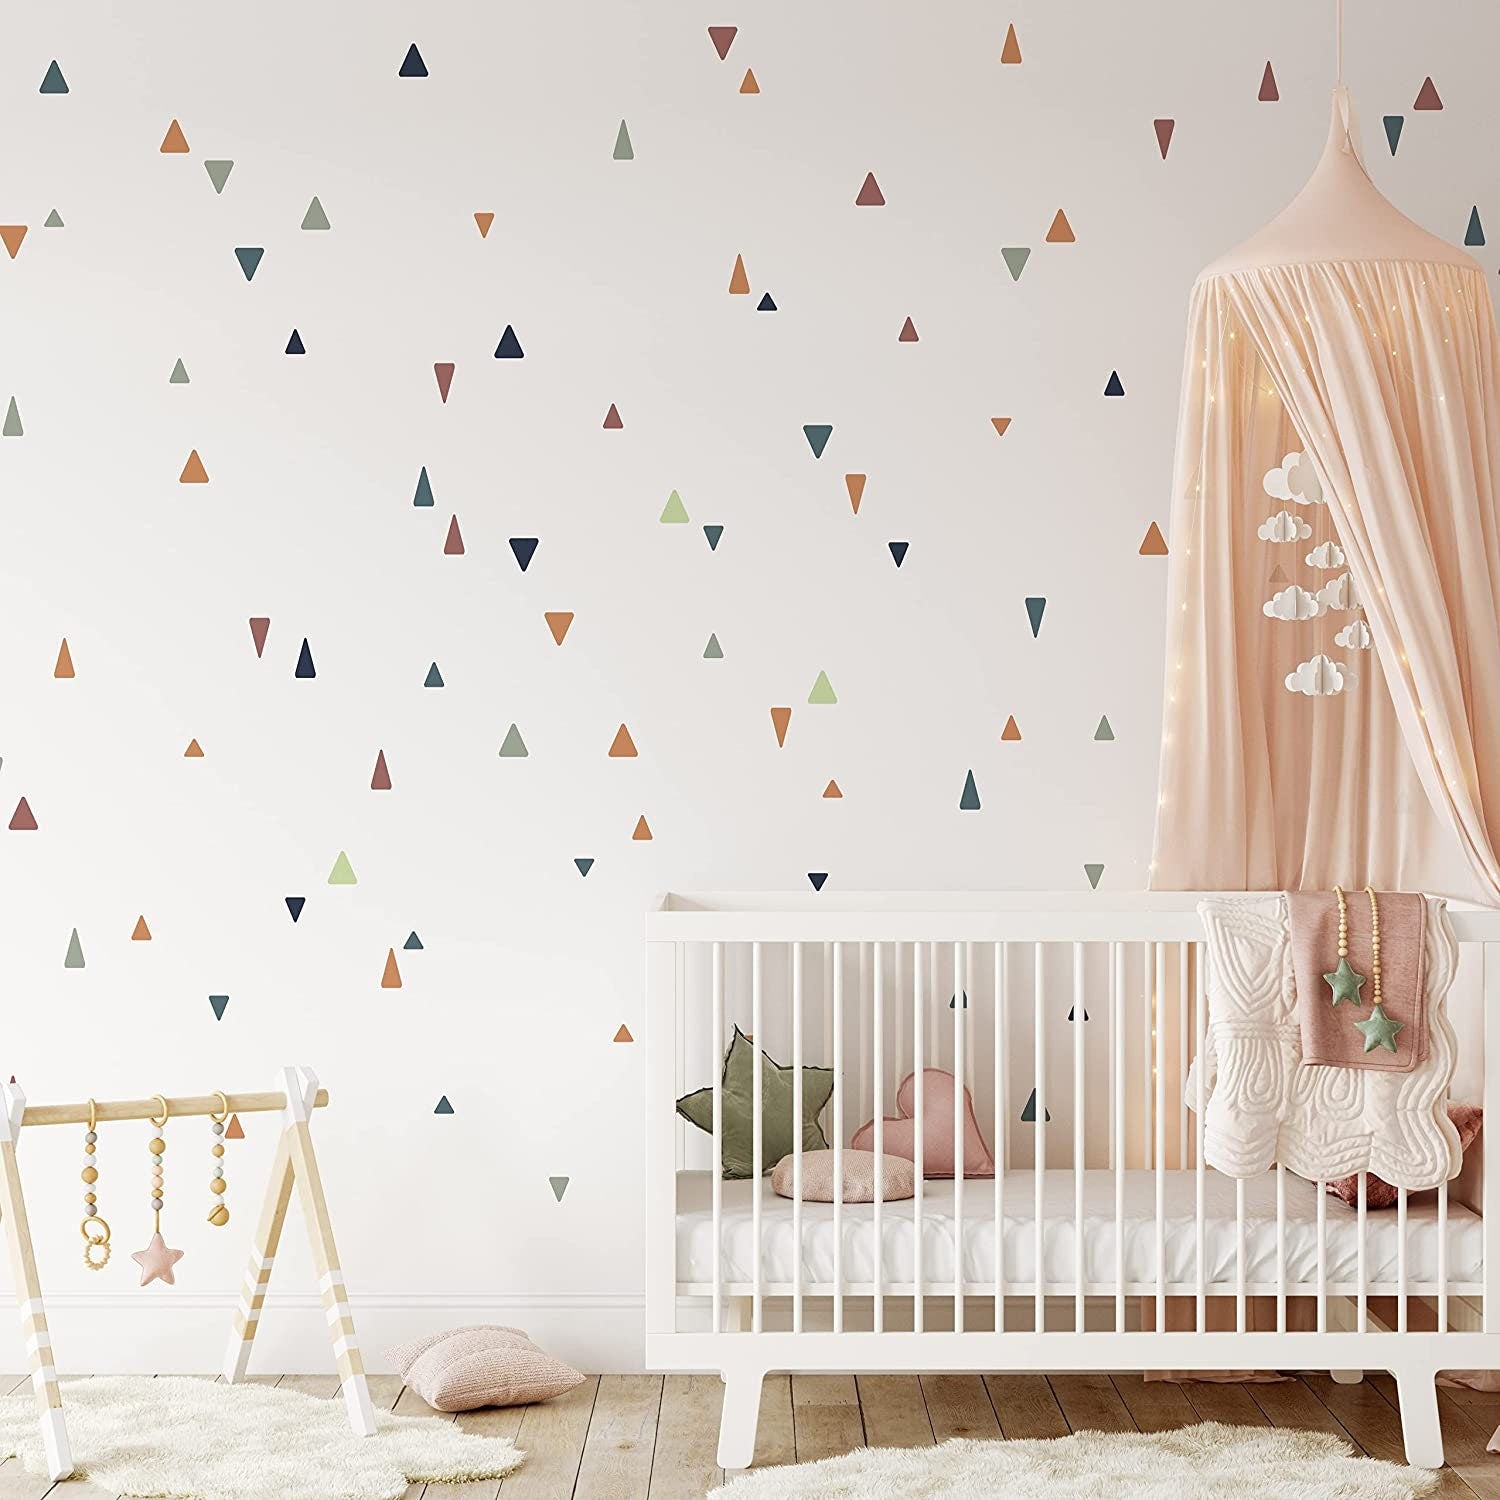 Boho Chic Colour Triangle Wall Stickers For Kids Rooms Children's Bedroom Wall Decals Nursery